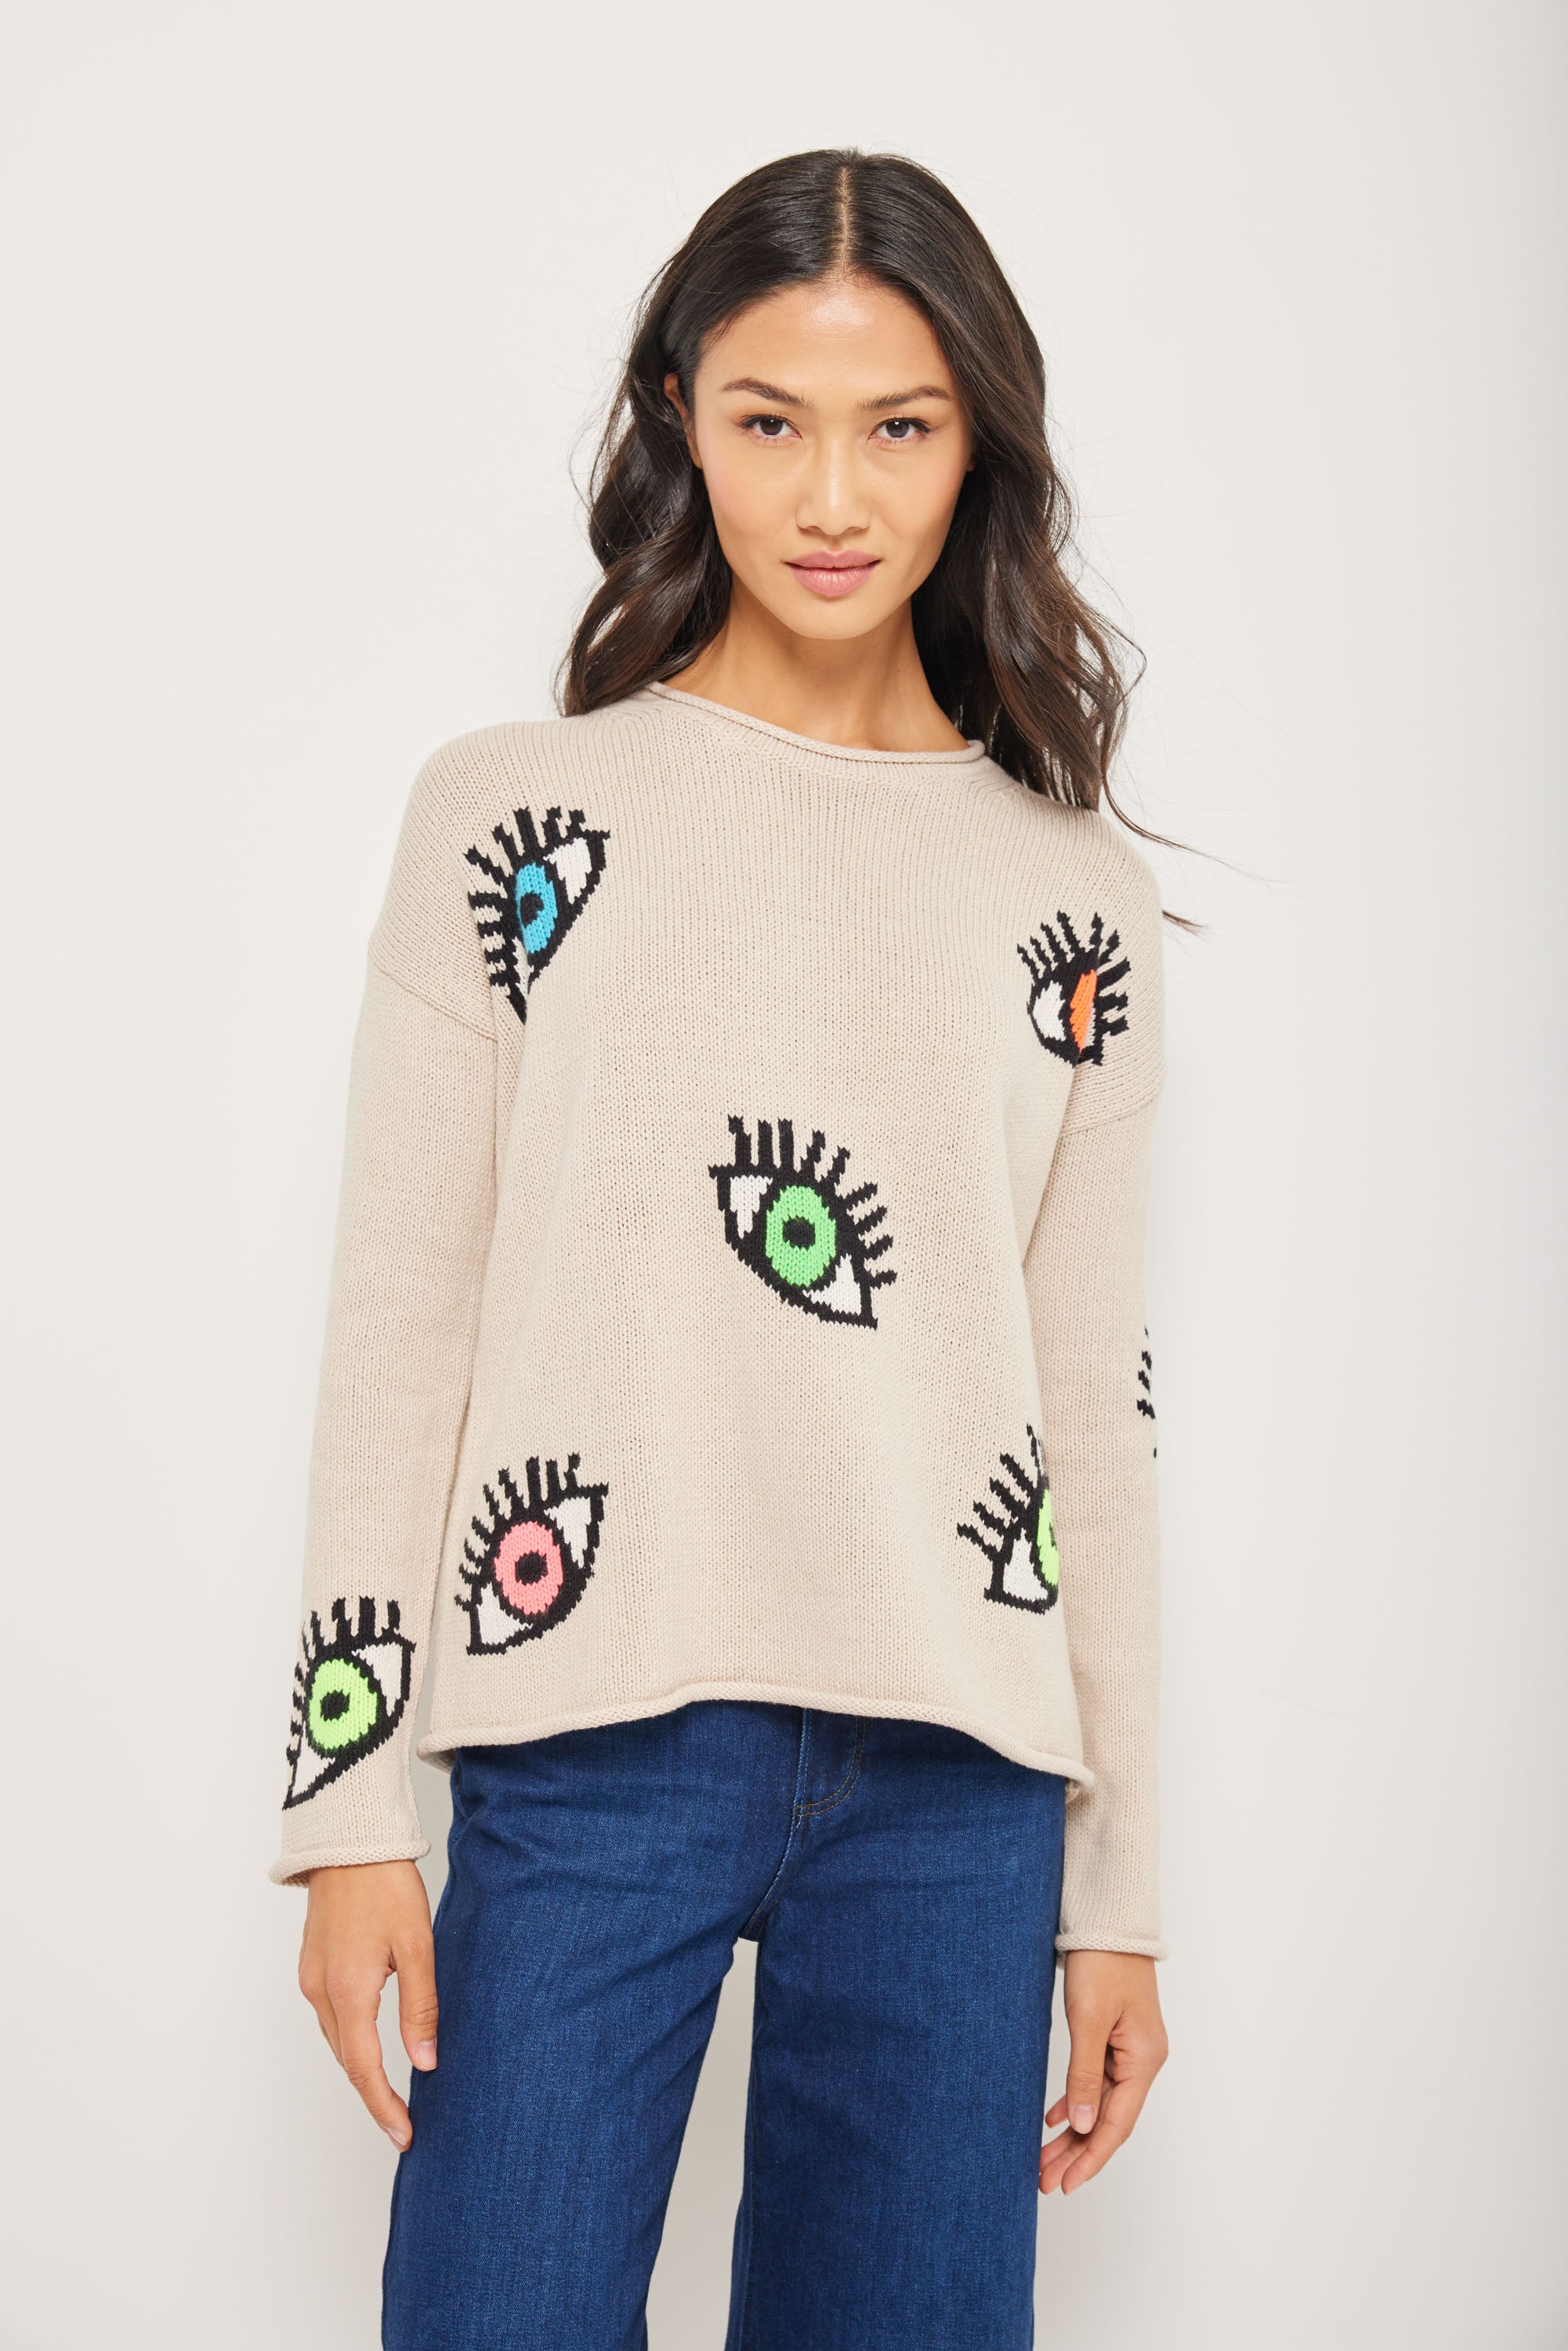 Lisa Todd Eyes On You Sweater